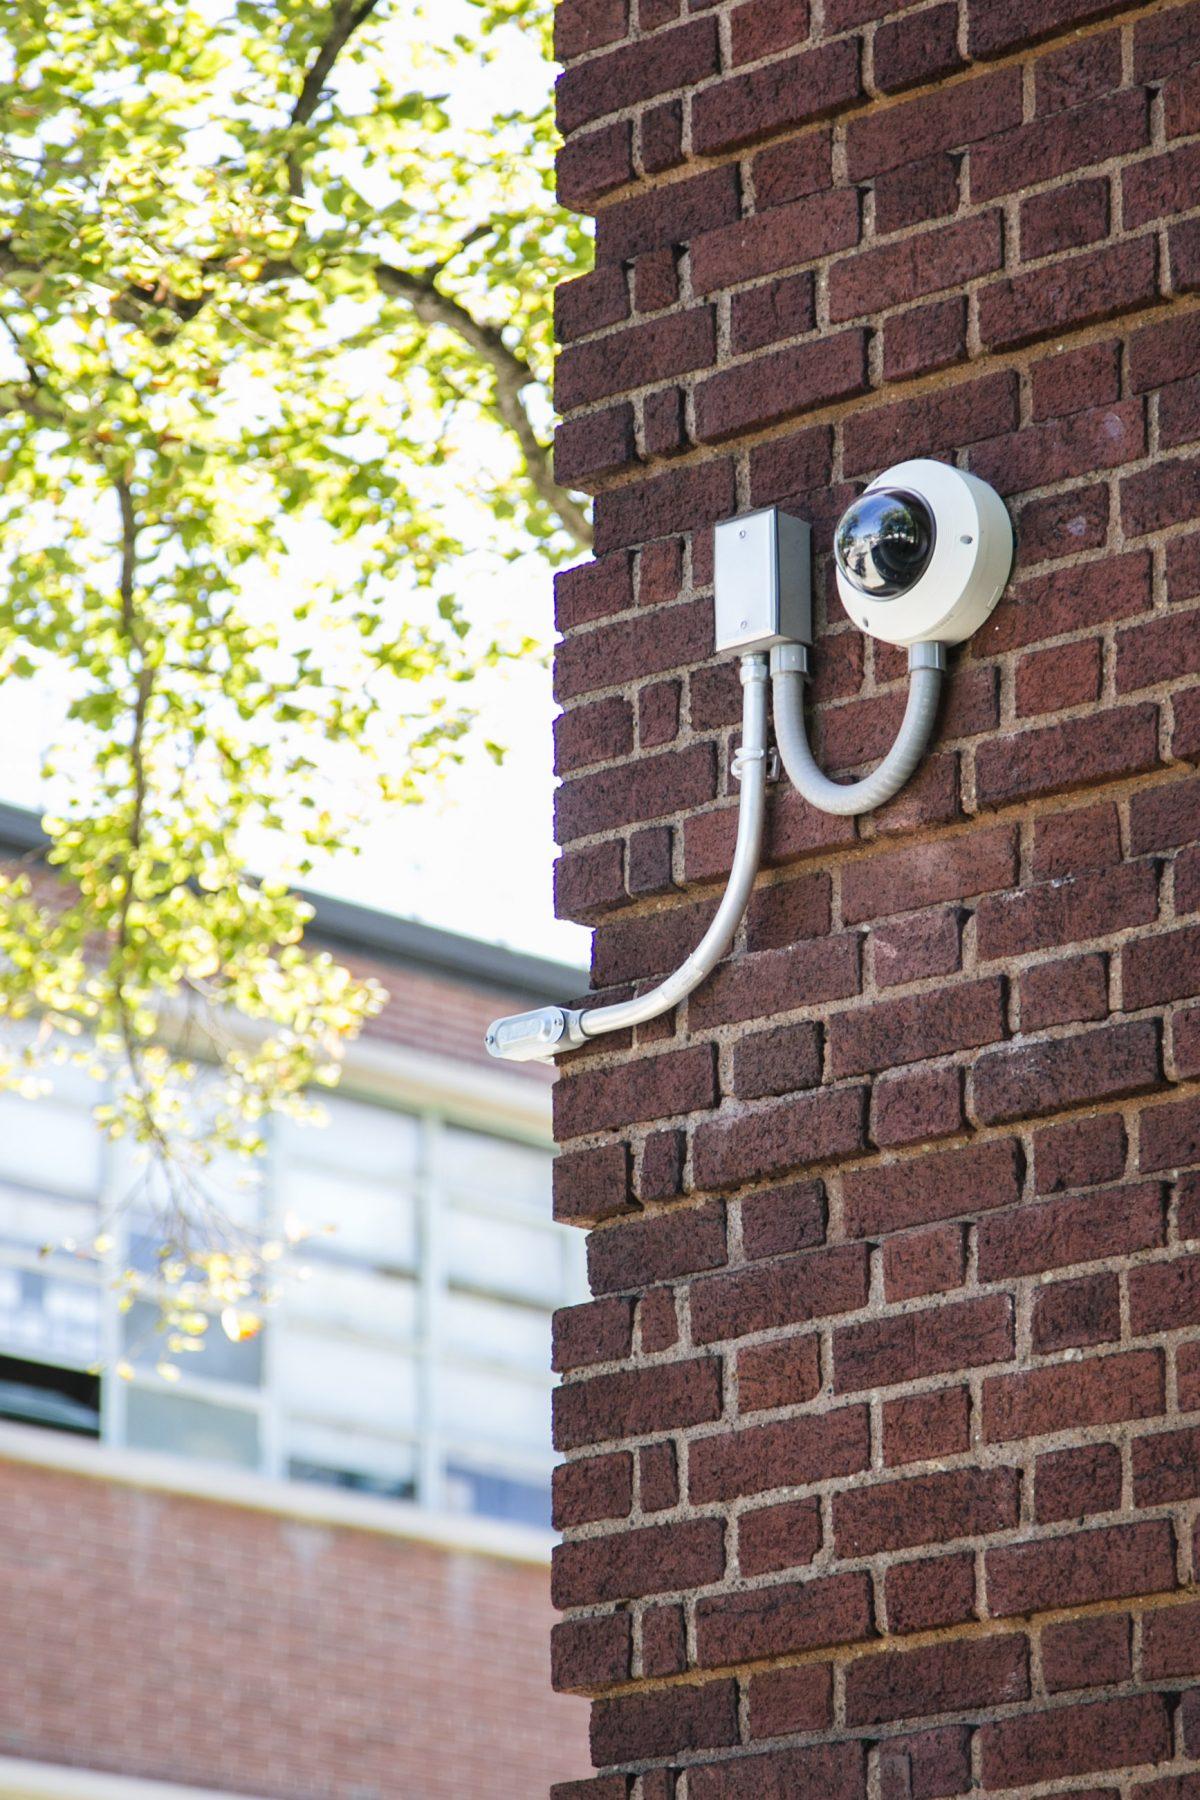 A camera at St. Elizabeth Catholic Academy in Ozone Park, Queens, on Sept. 15, 2015, which is the first school to install Scotti’s pro bono bulletproof walls and advanced surveillance system. (Samira Bouaou/Epoch Times)